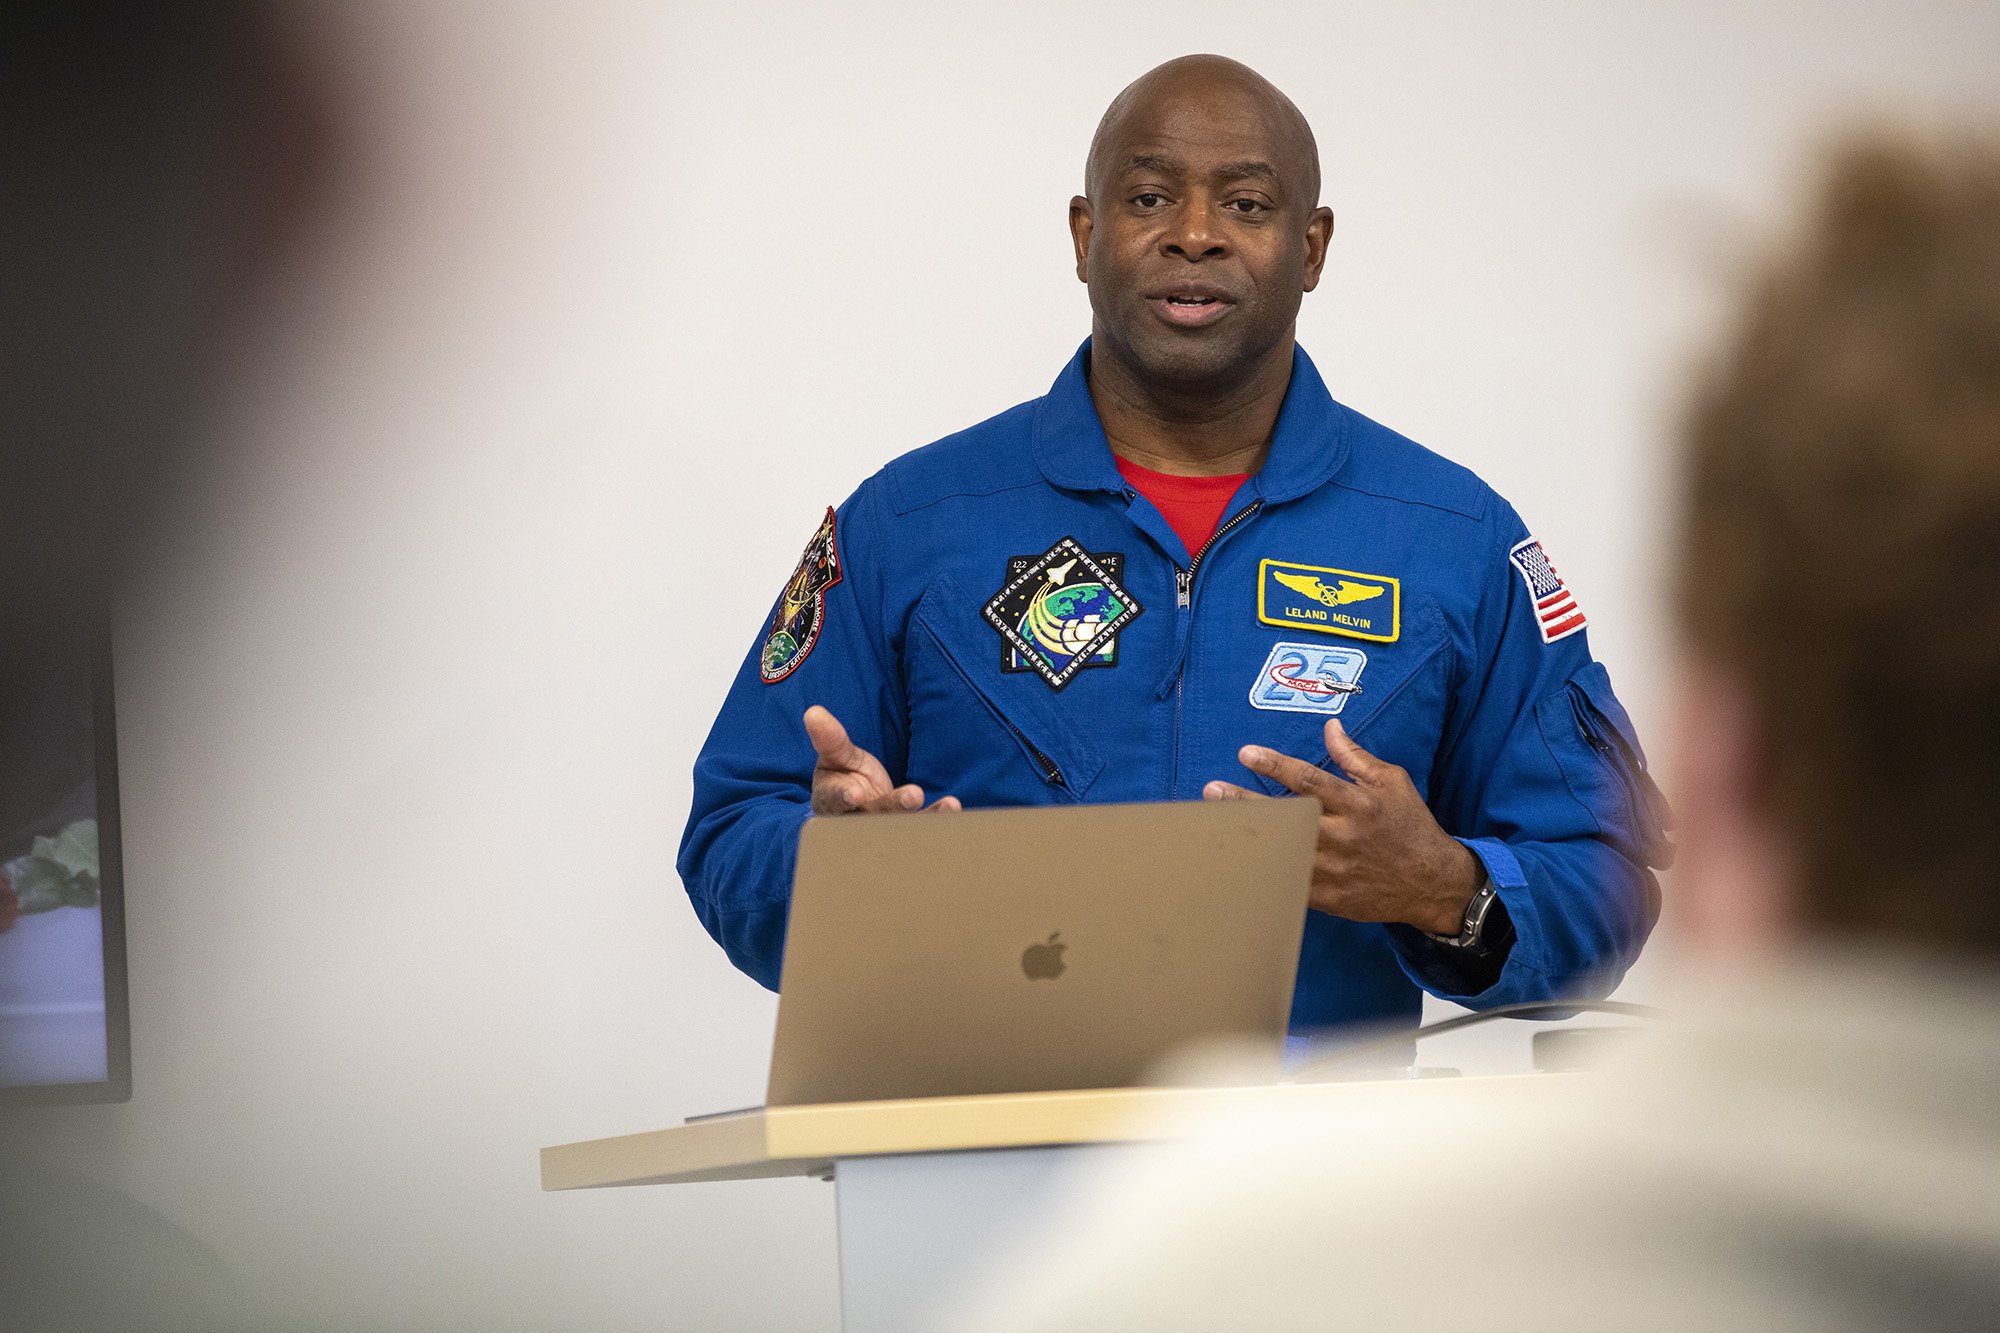 Former NASA Astronaut Leland Melvin talks to students at the College of Nanotechnology, Science, and Engineering.